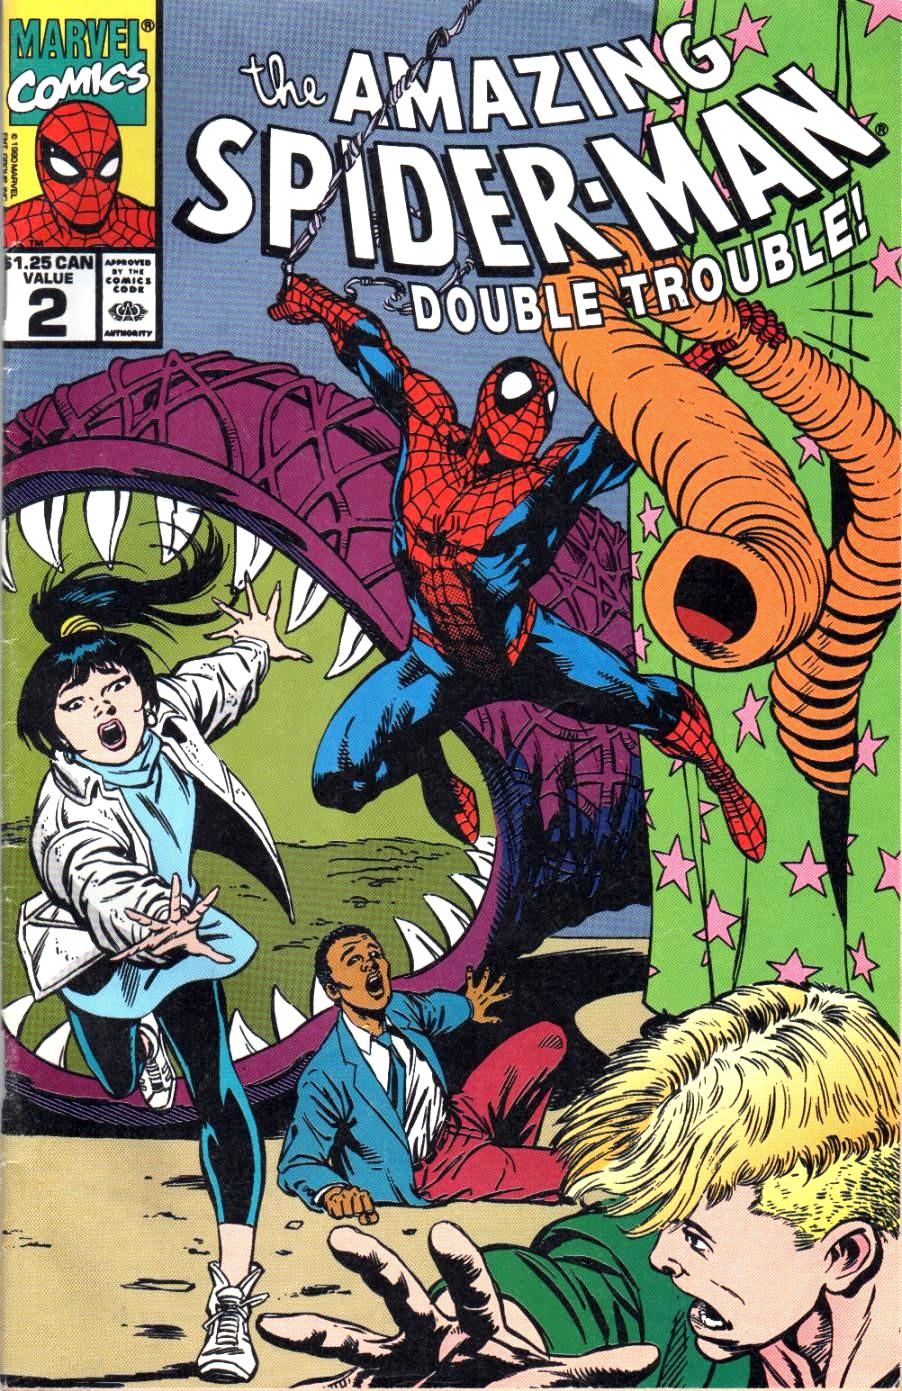 Amazing Spider-Man: Double Trouble Vol. 1 #2